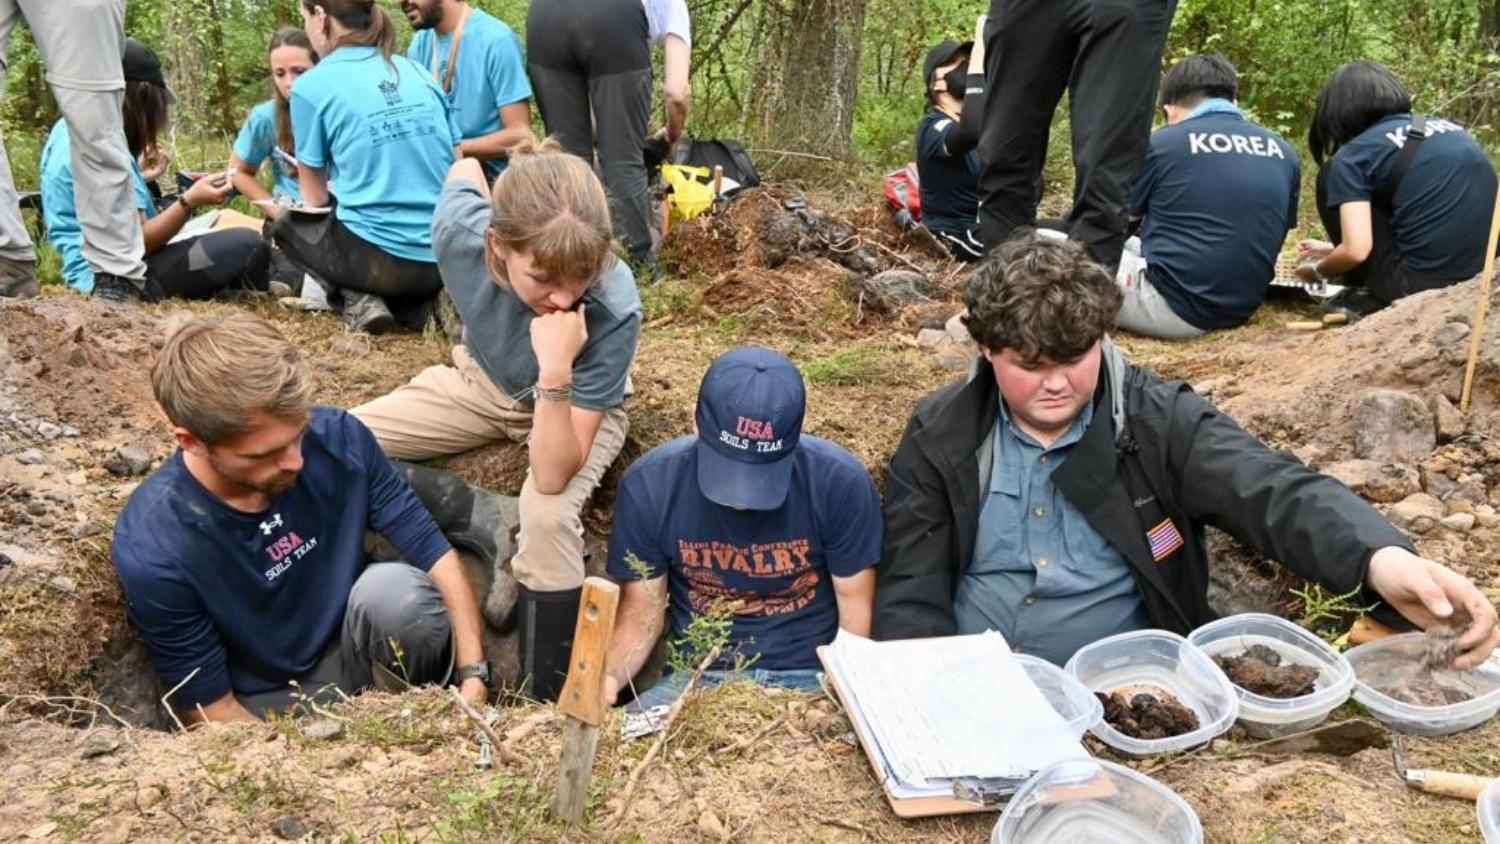 World Soil Judging Team USA practices in a Scottish soil pit